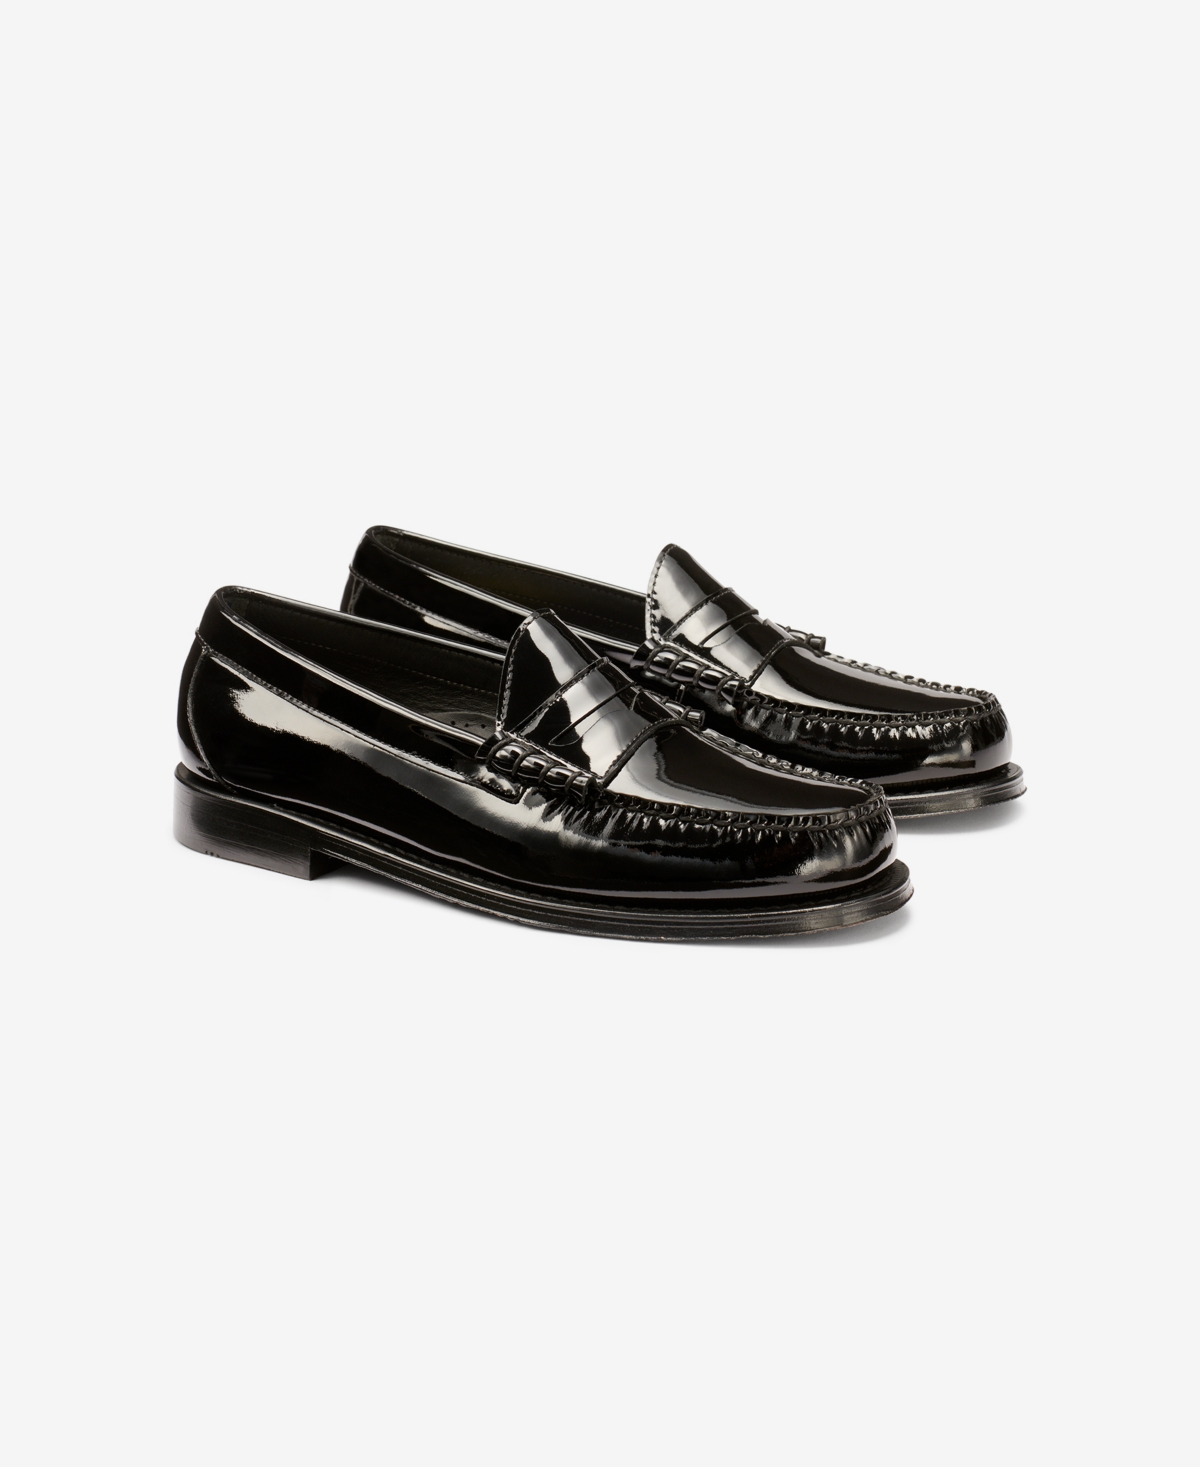 Gh Bass G.h.bass Men's Larson Monogram Heritage Weejuns Loafers In Black Patent